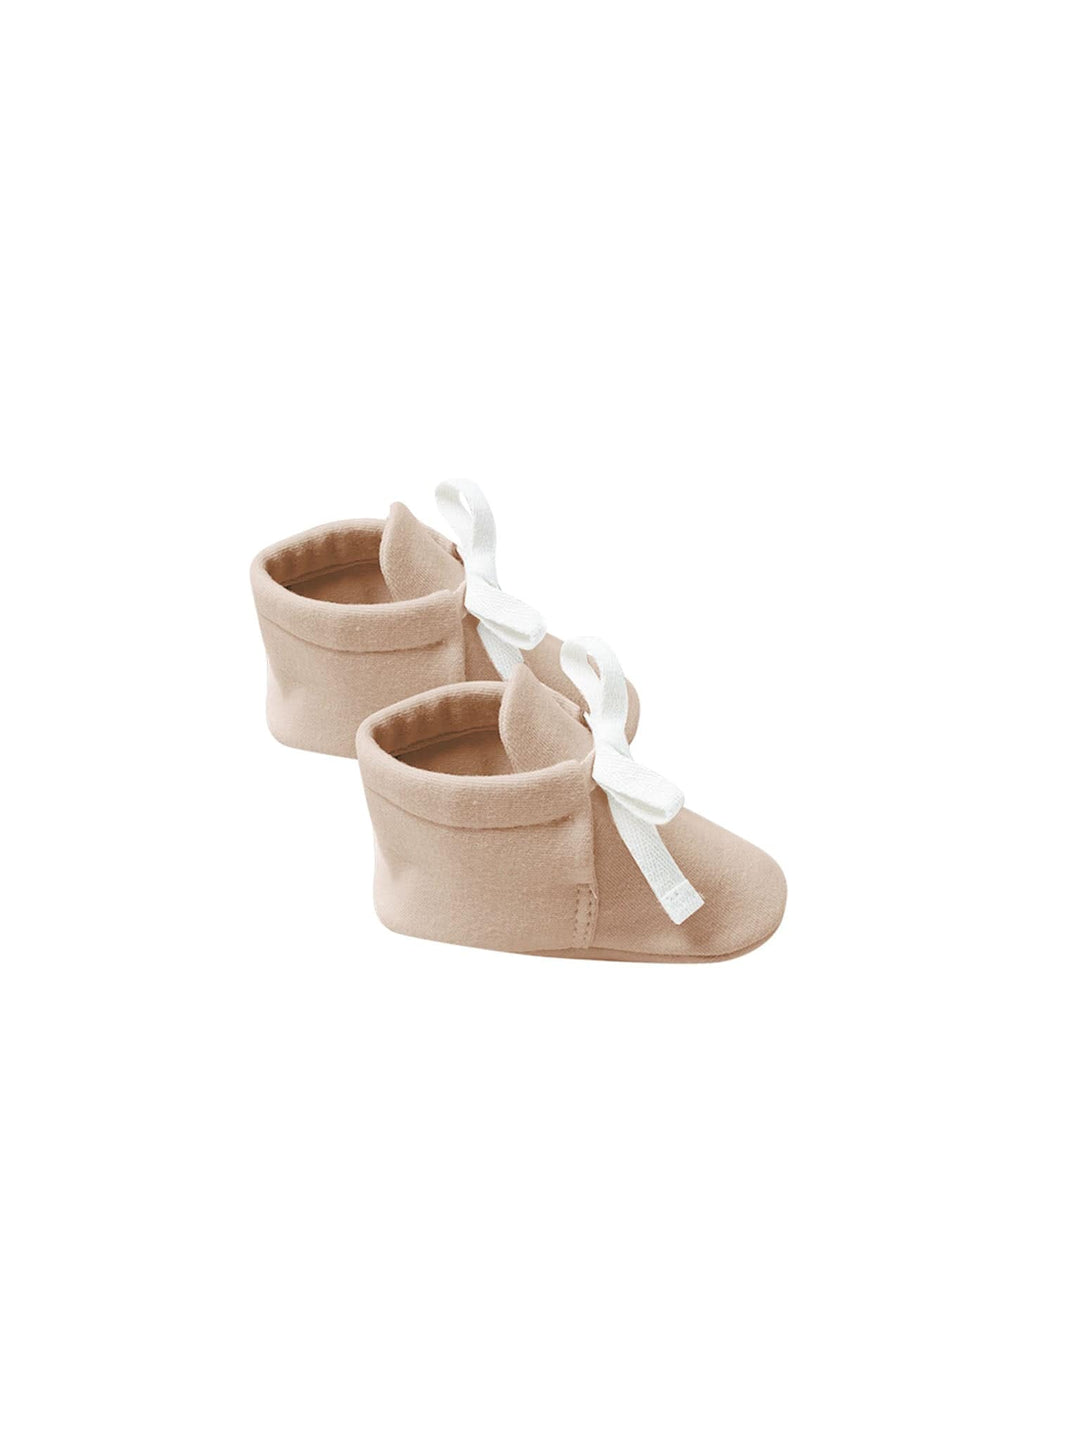 Quincy Mae Baby Booties - Shell